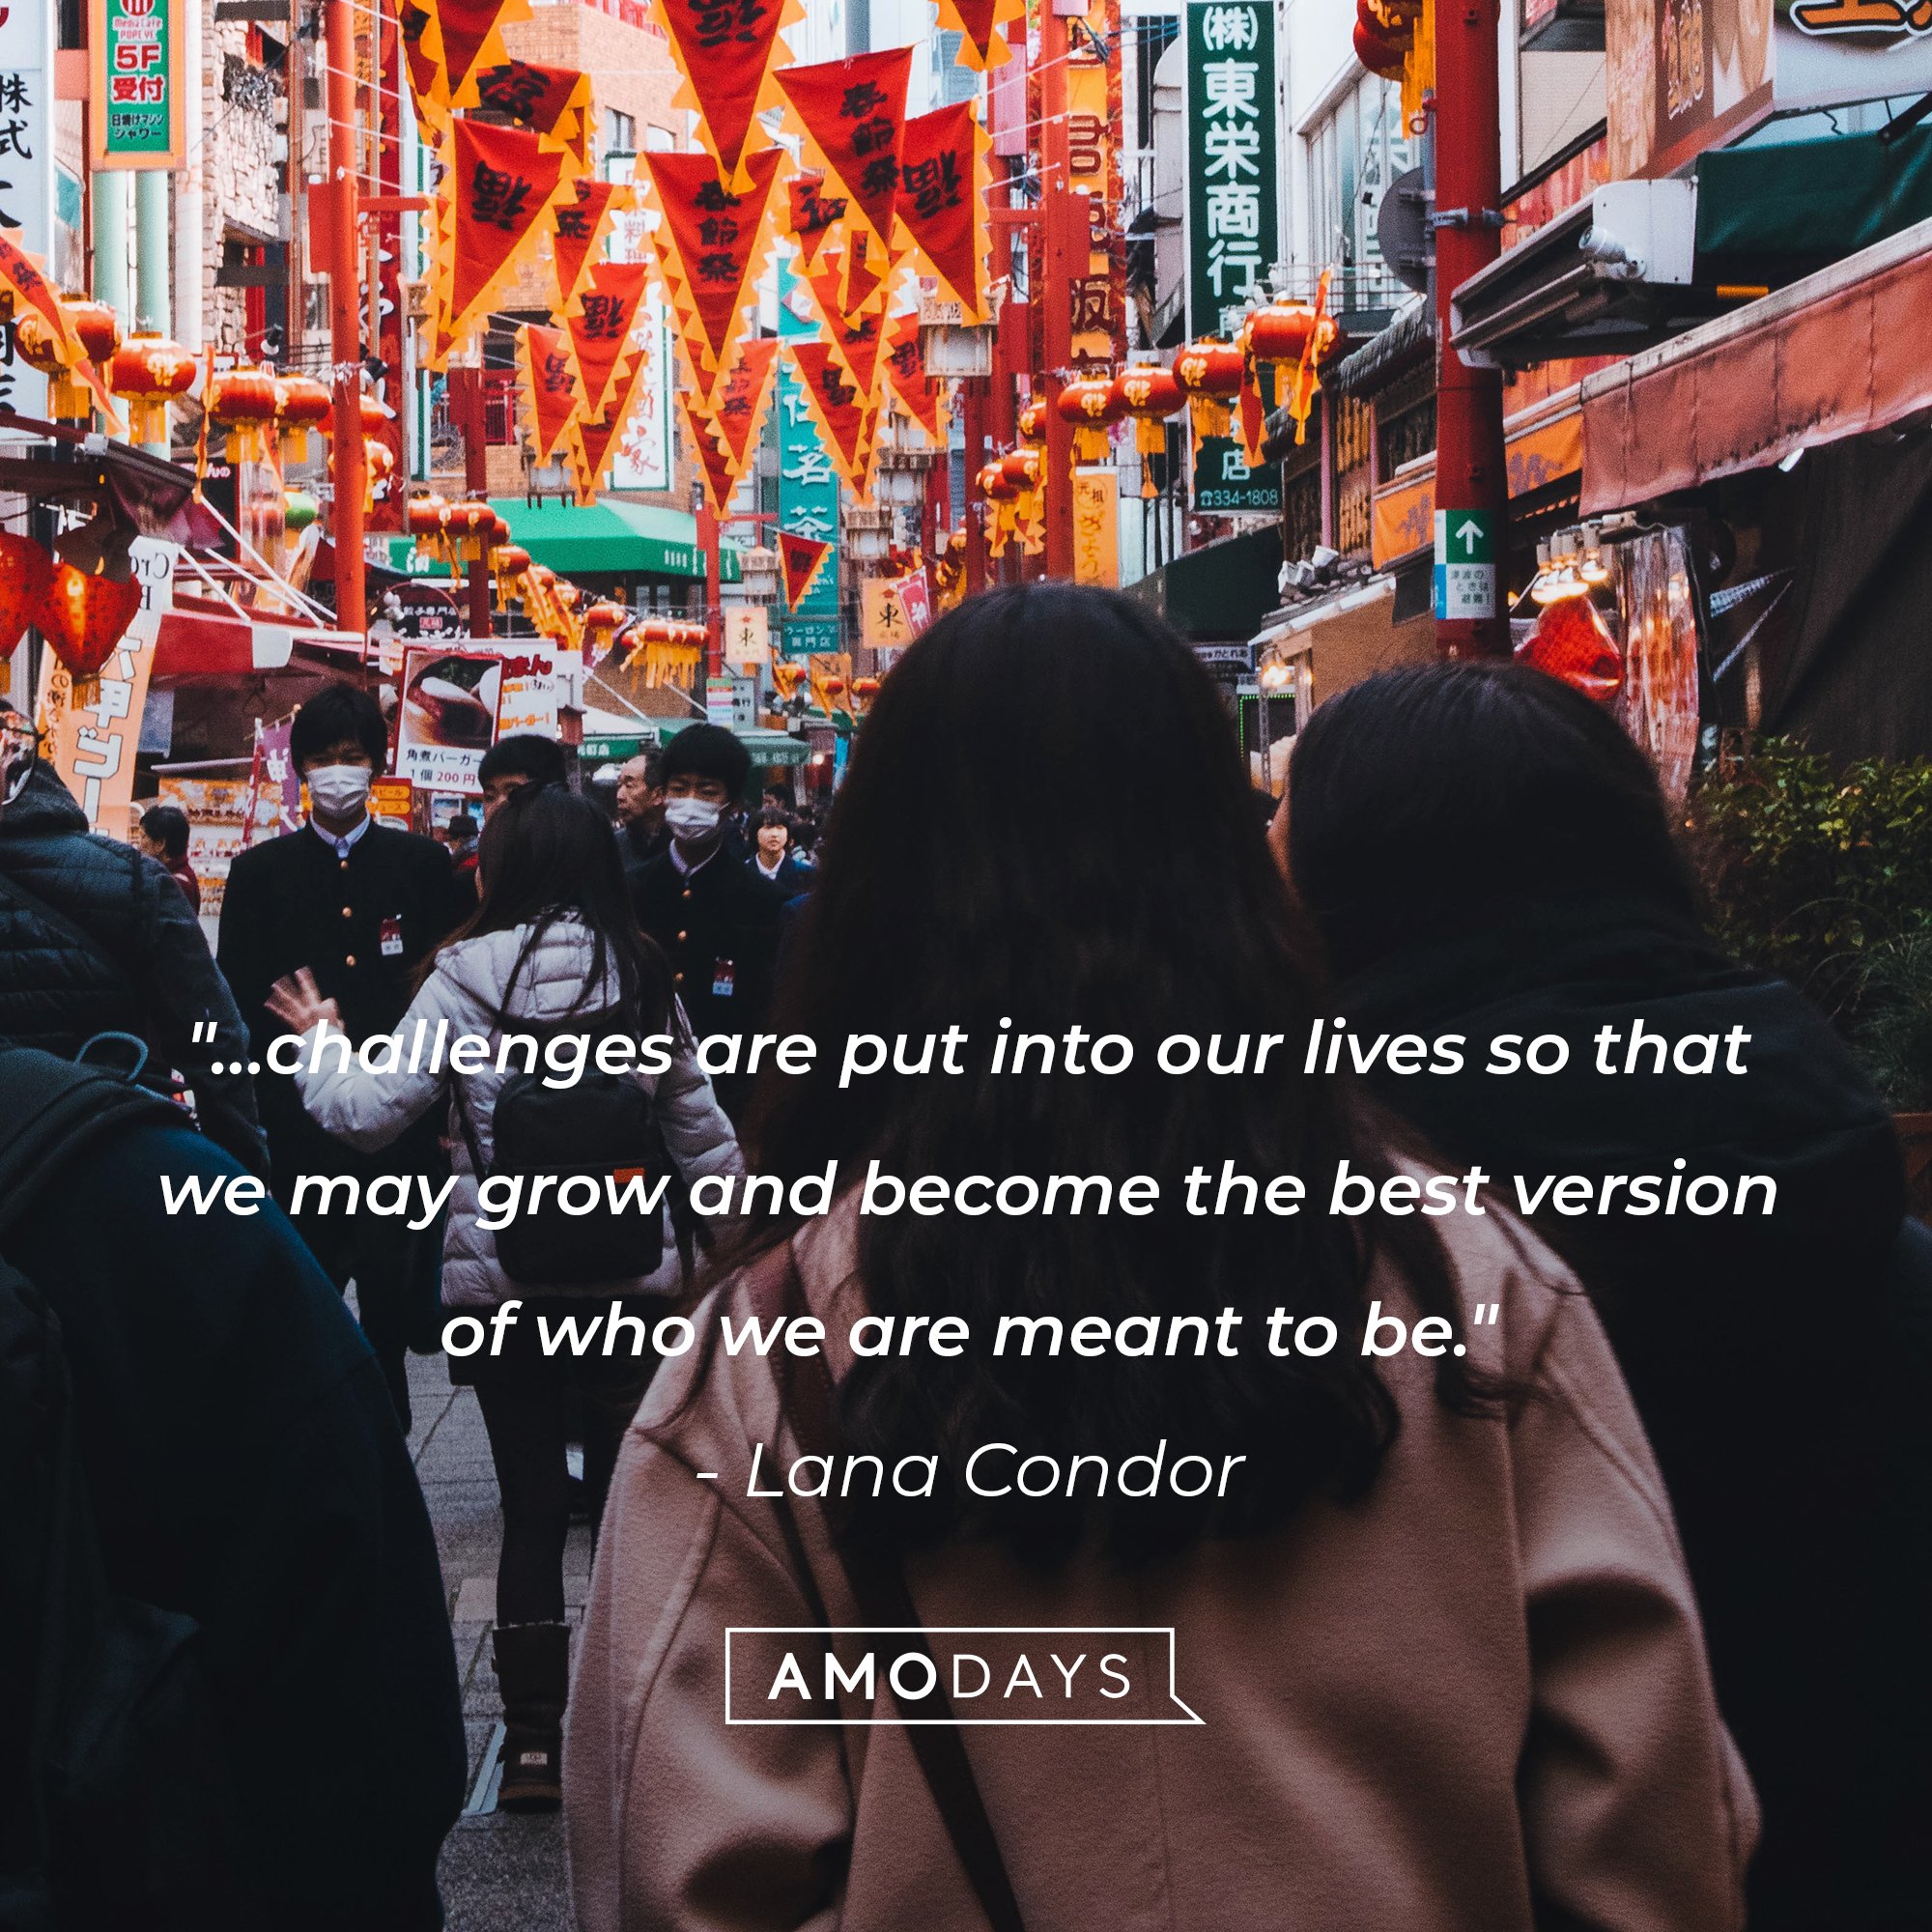 Lana Condor’s quote: "…challenges are put into our lives so that we may grow and become the best version of who we are meant to be." | Image: AmoDays